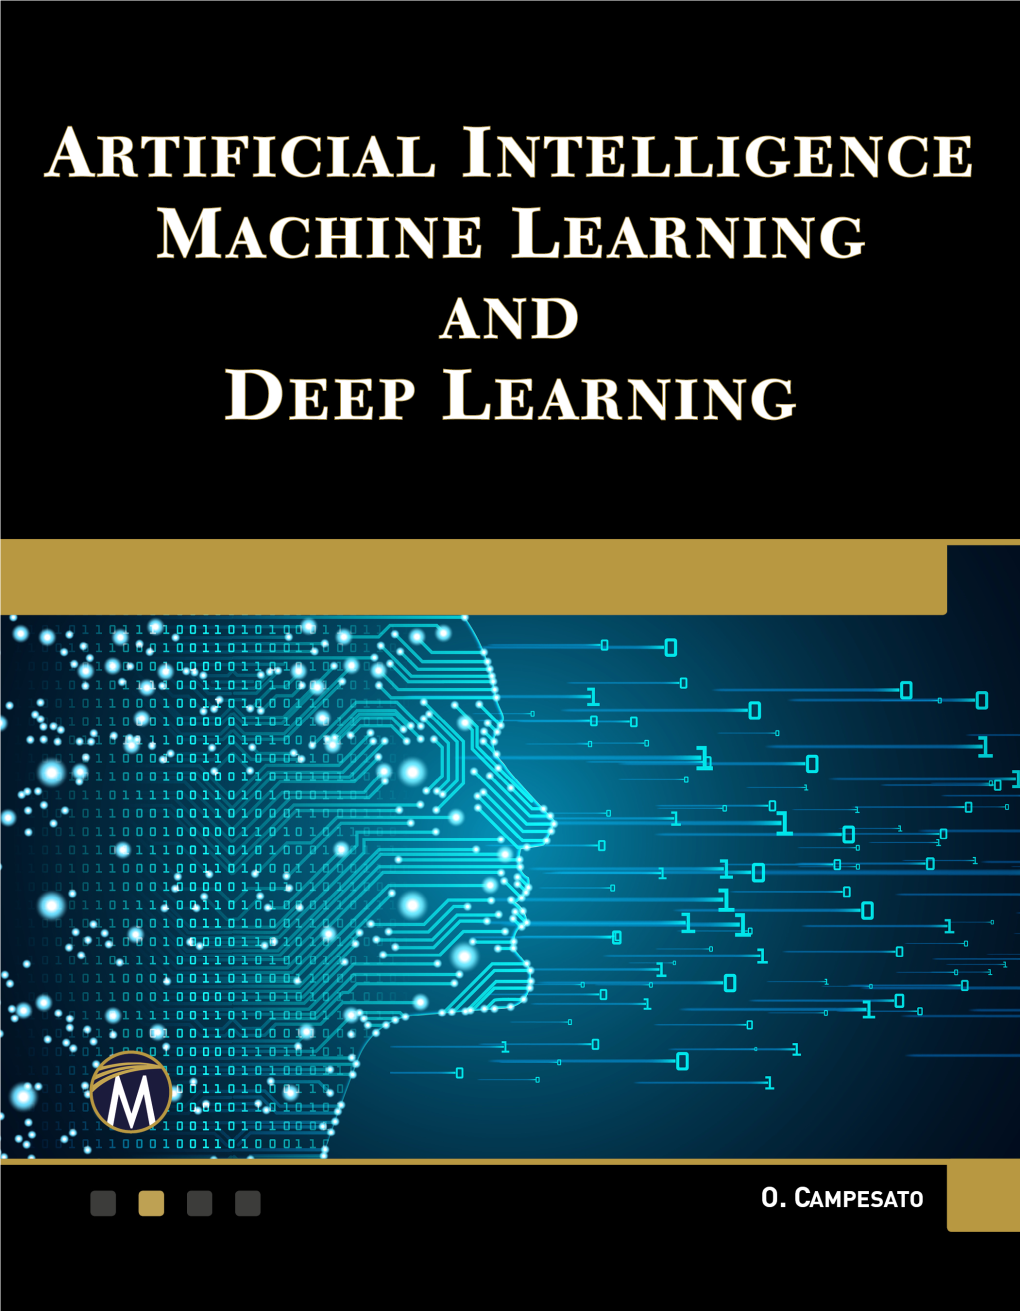 Artificial Intelligence Machine Learning and Deep Learning